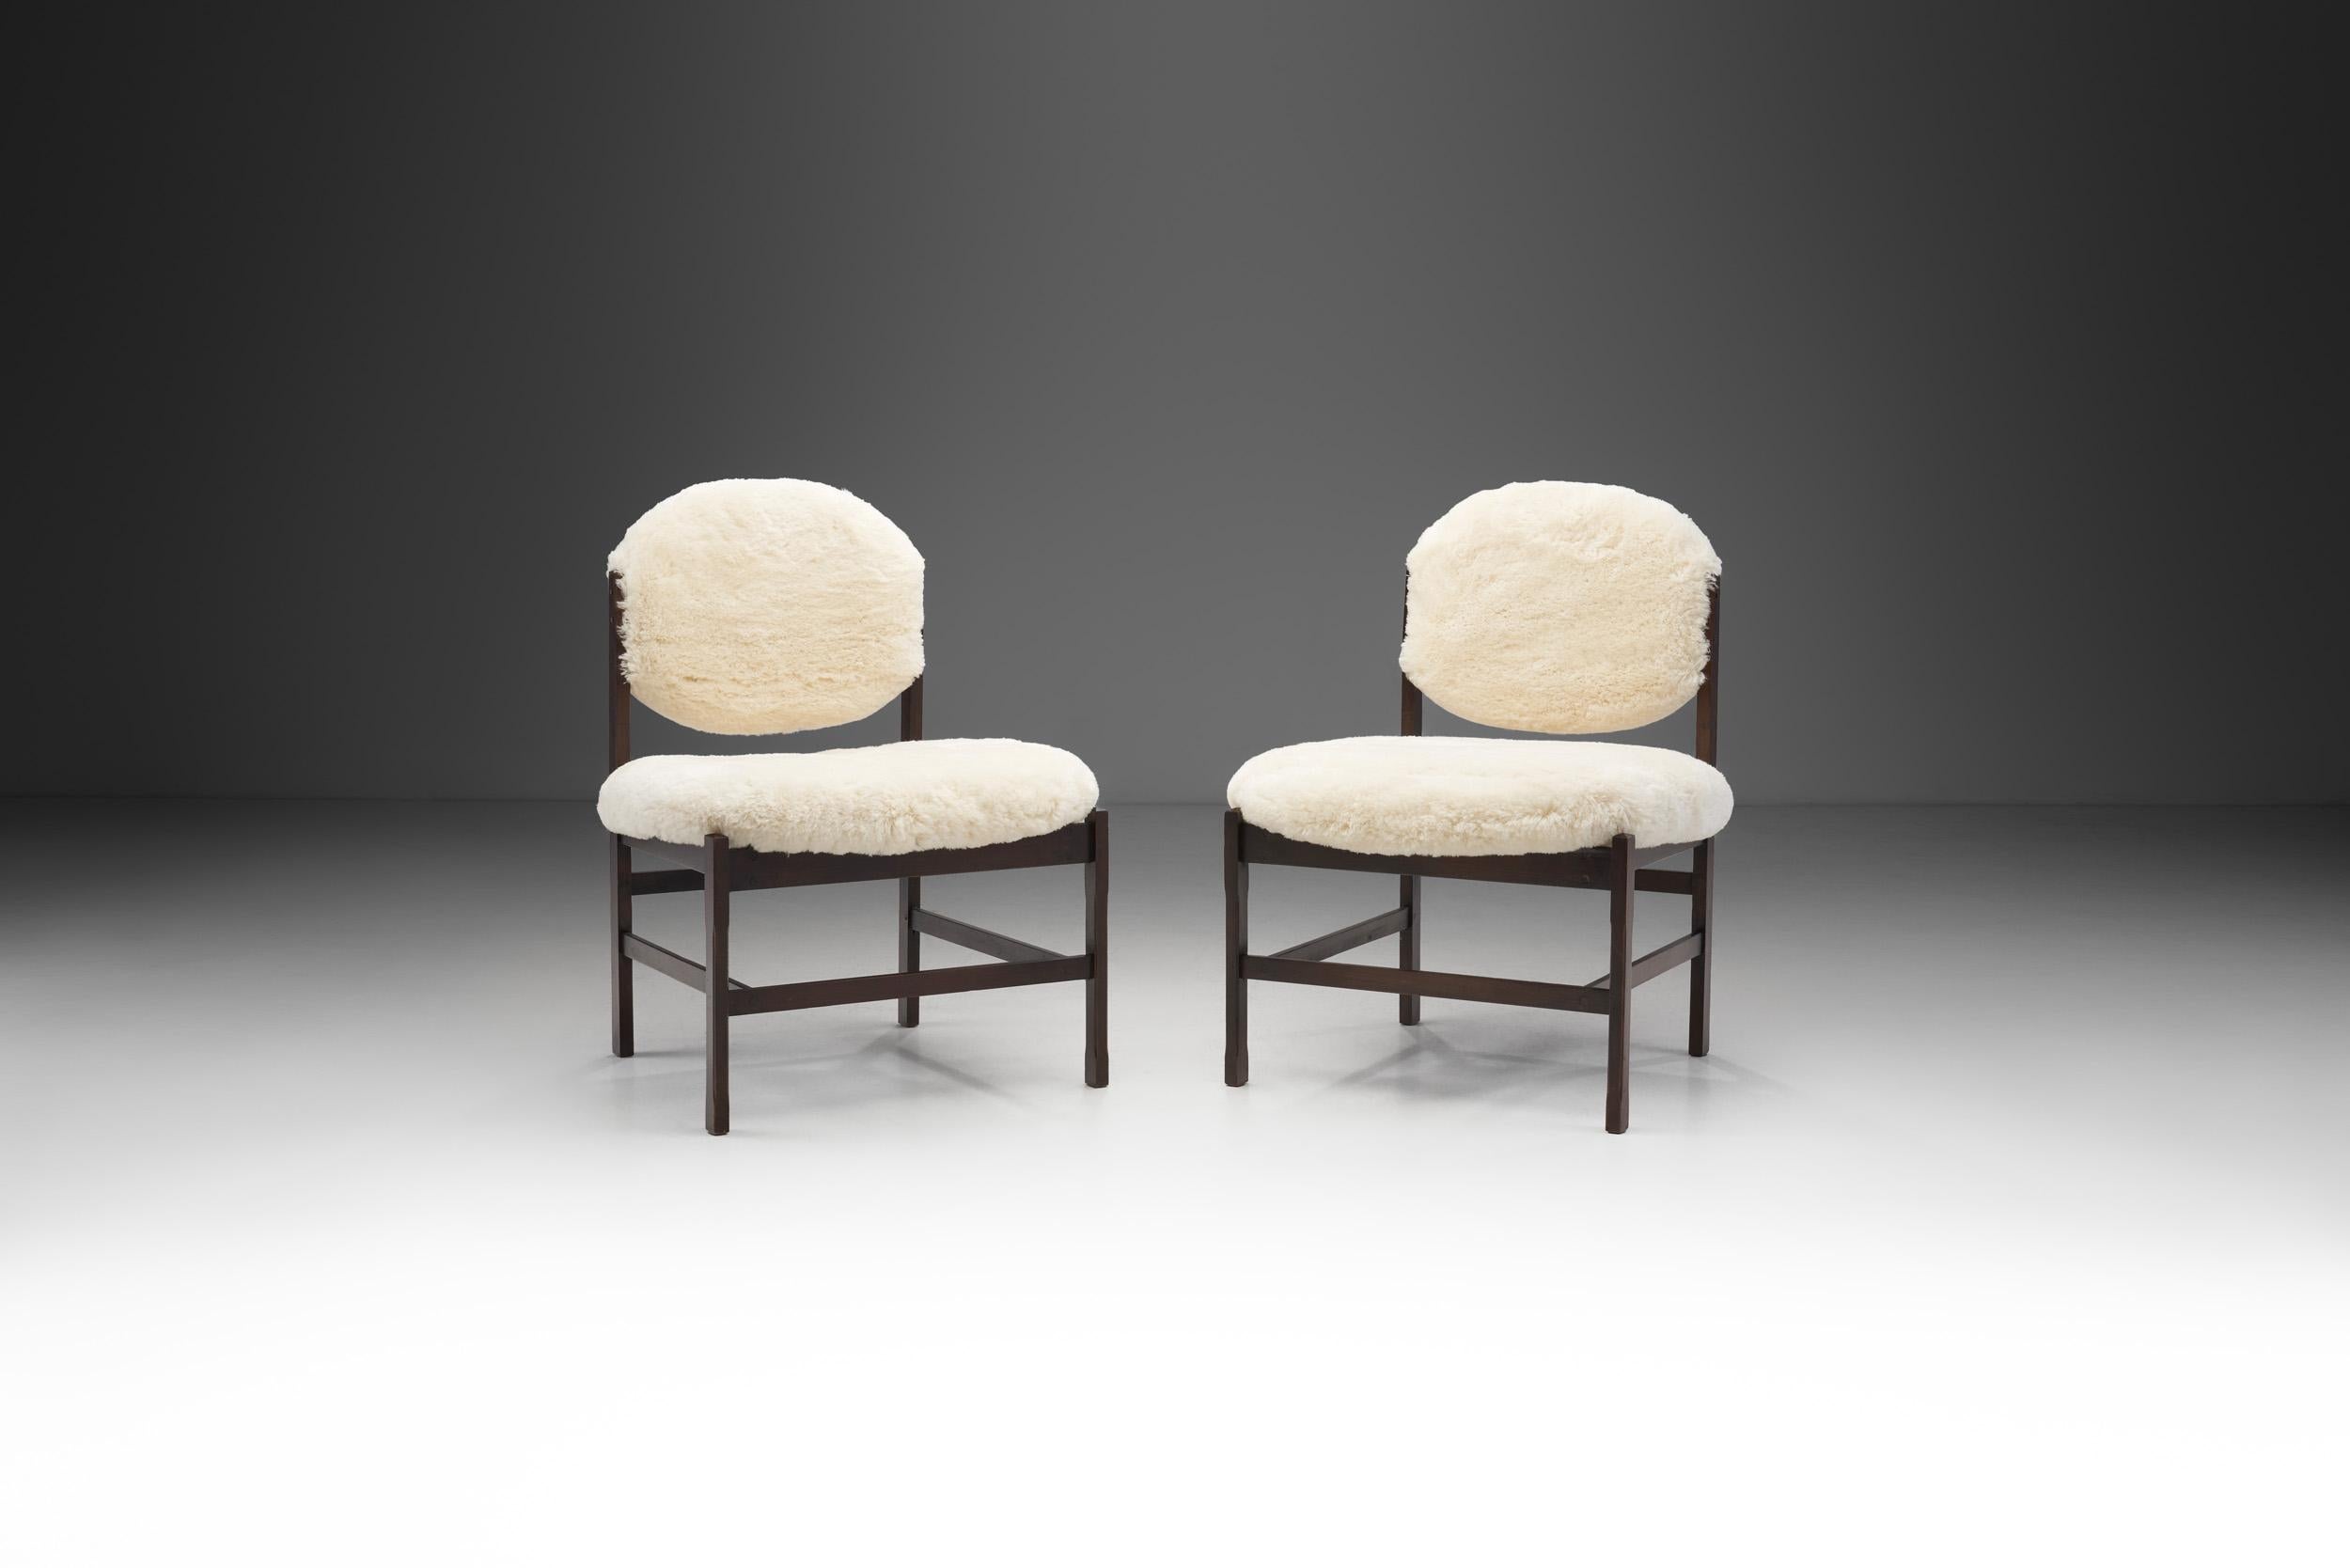 The period from the 1940s through the 1960s was a high point for European furniture makers. This pair of easy chairs were created during this period of creative overflow, with a typically European mid-century modern style.

The chairs’ simple and